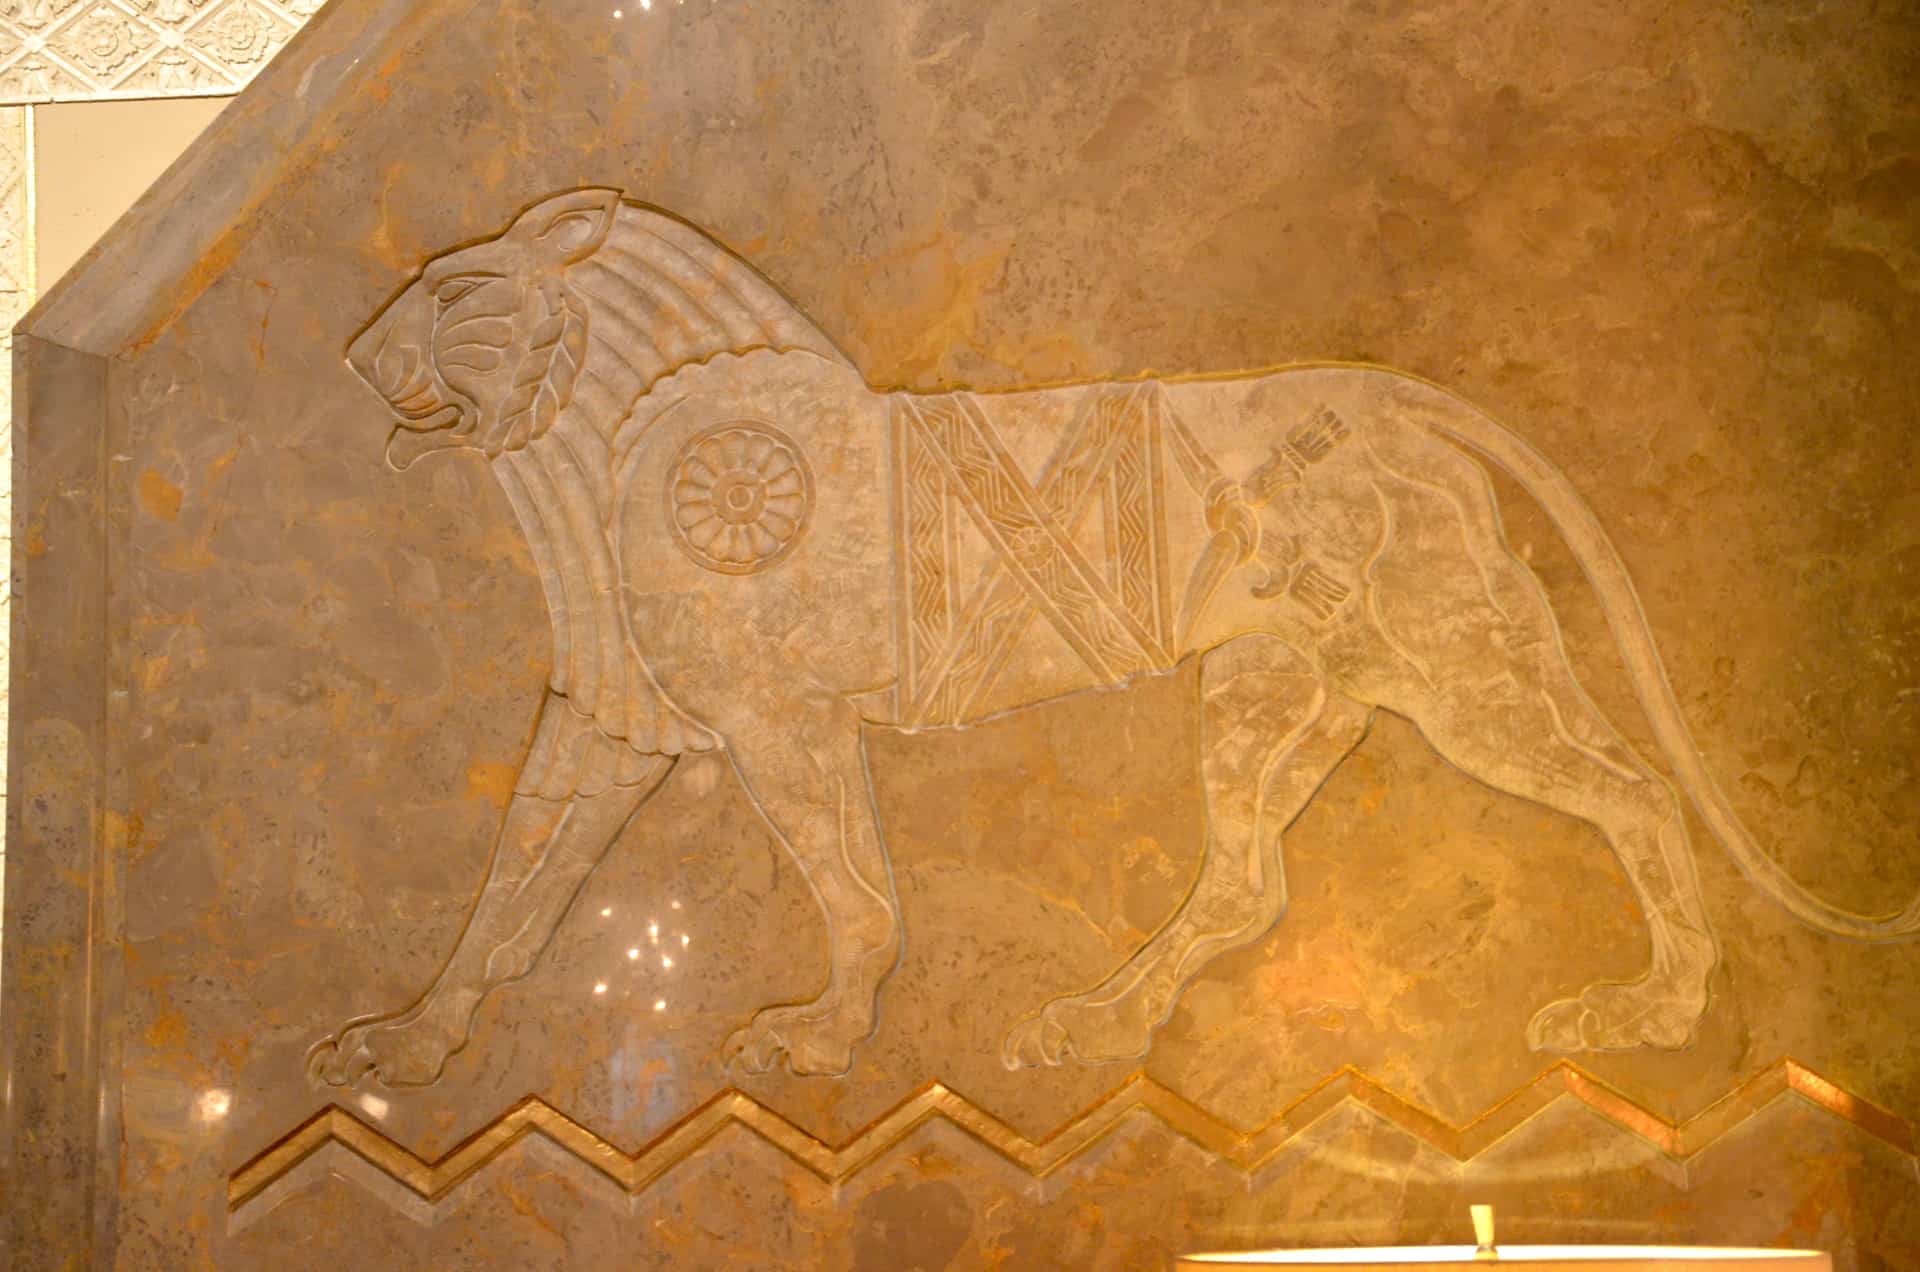 Relief of a lion at King Arthur Court at the Hotel InterContinental in Chicago, Illinois